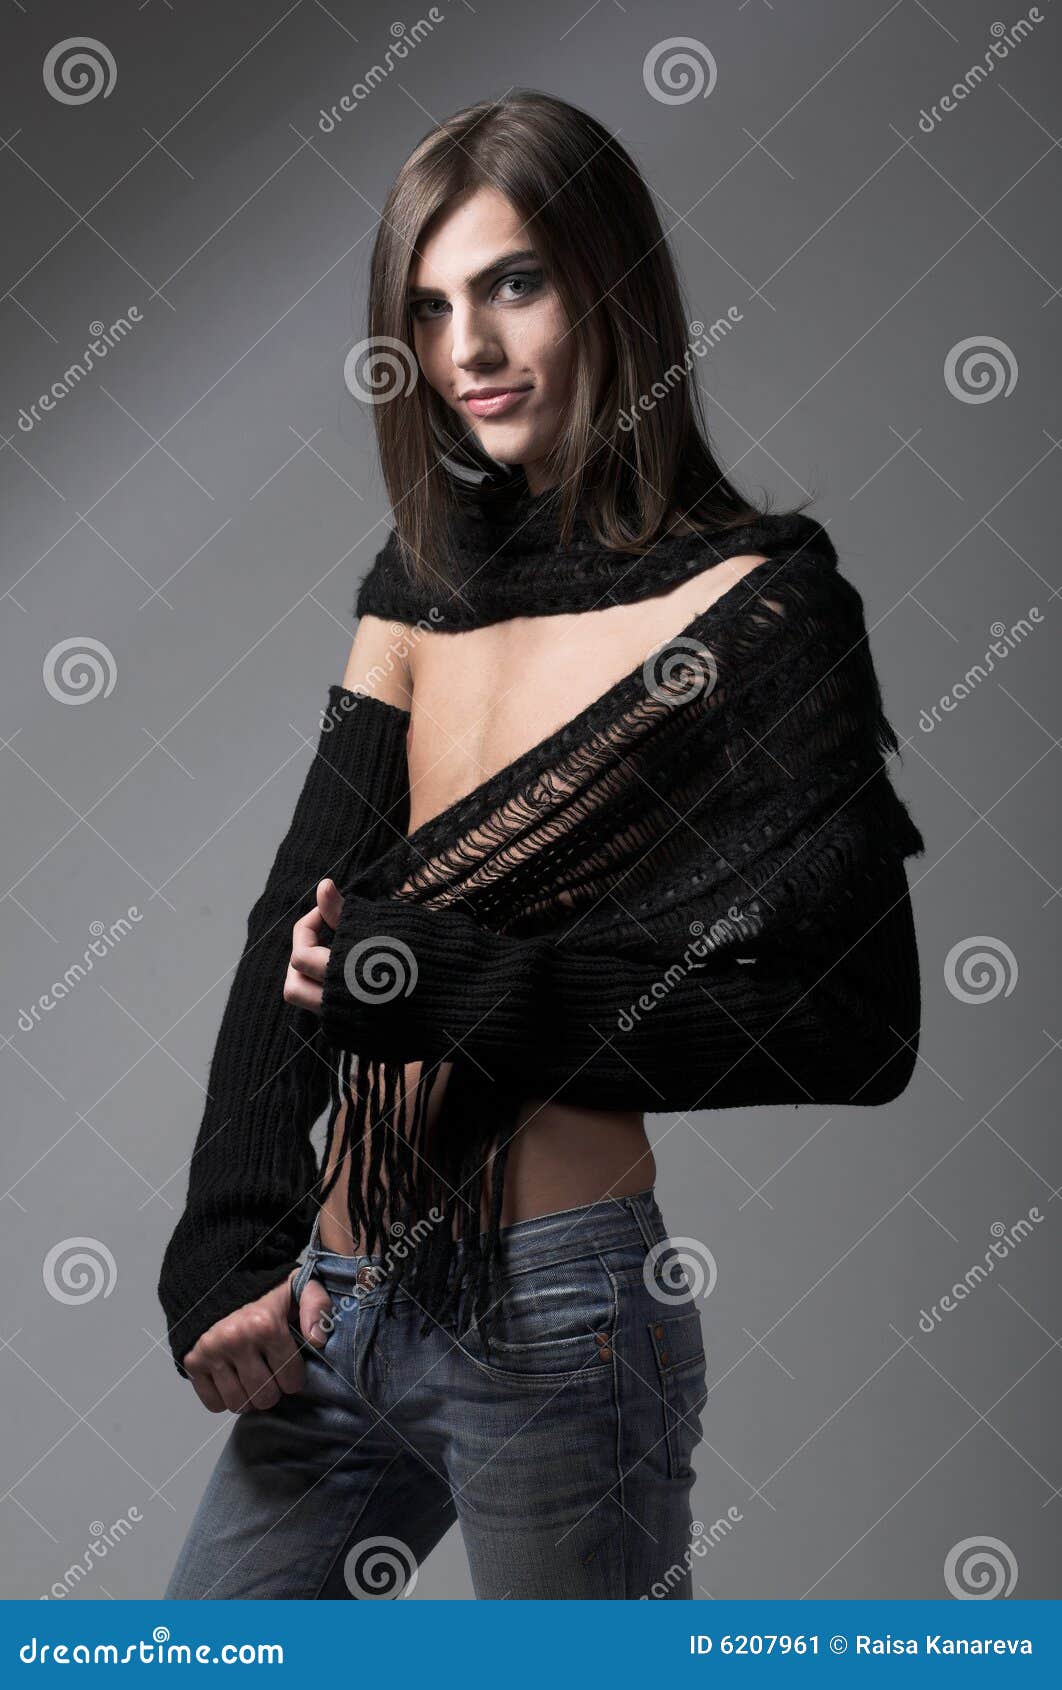 Young Glamor Man With Long Hair Stock Image - Image: 6207961